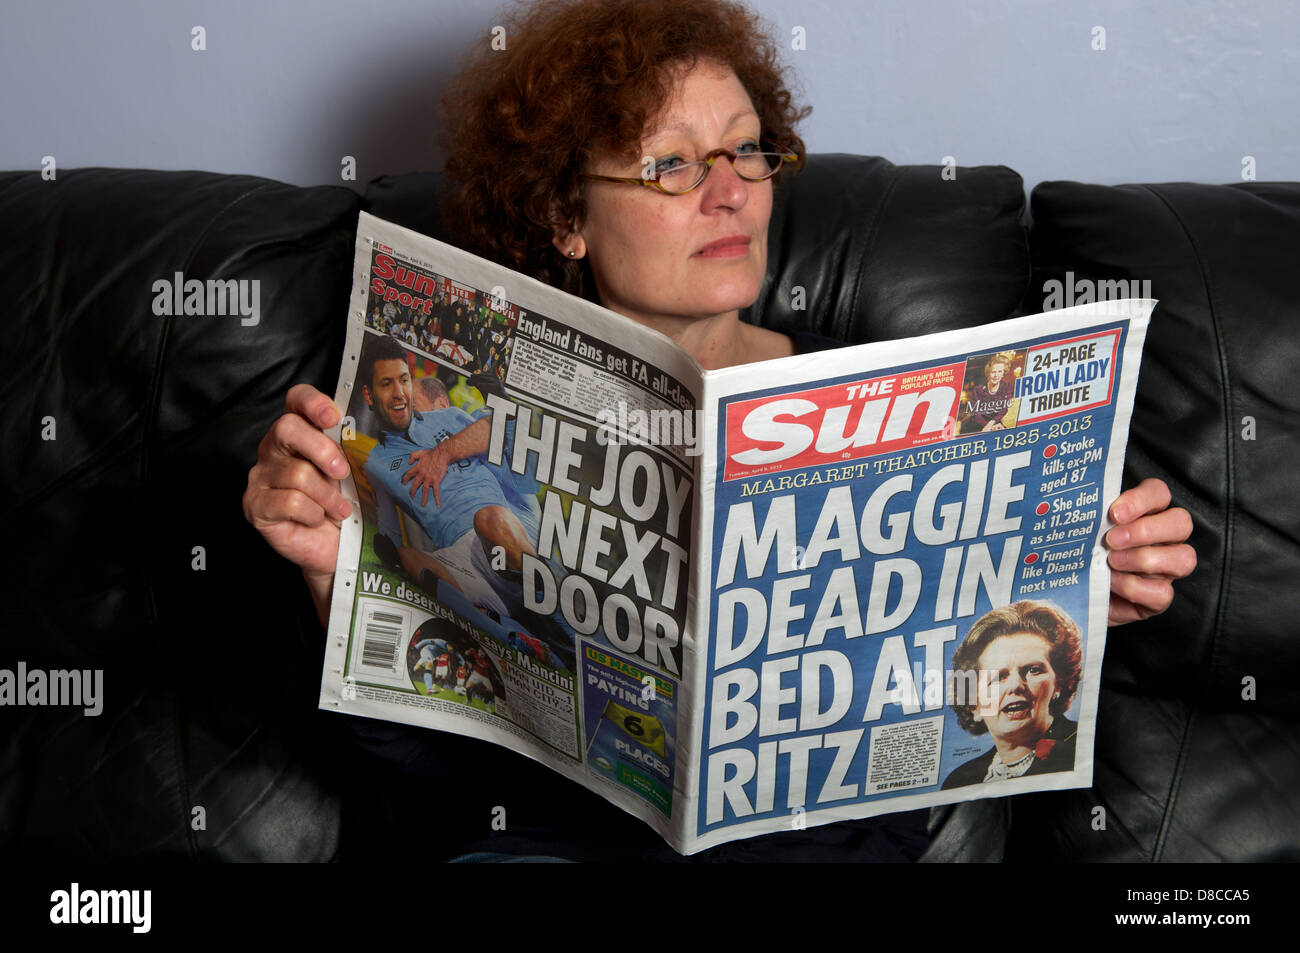 The Sun newspaper (09.04.13) with headline 'Maggie dead in bed at Ritz) Stock Photo